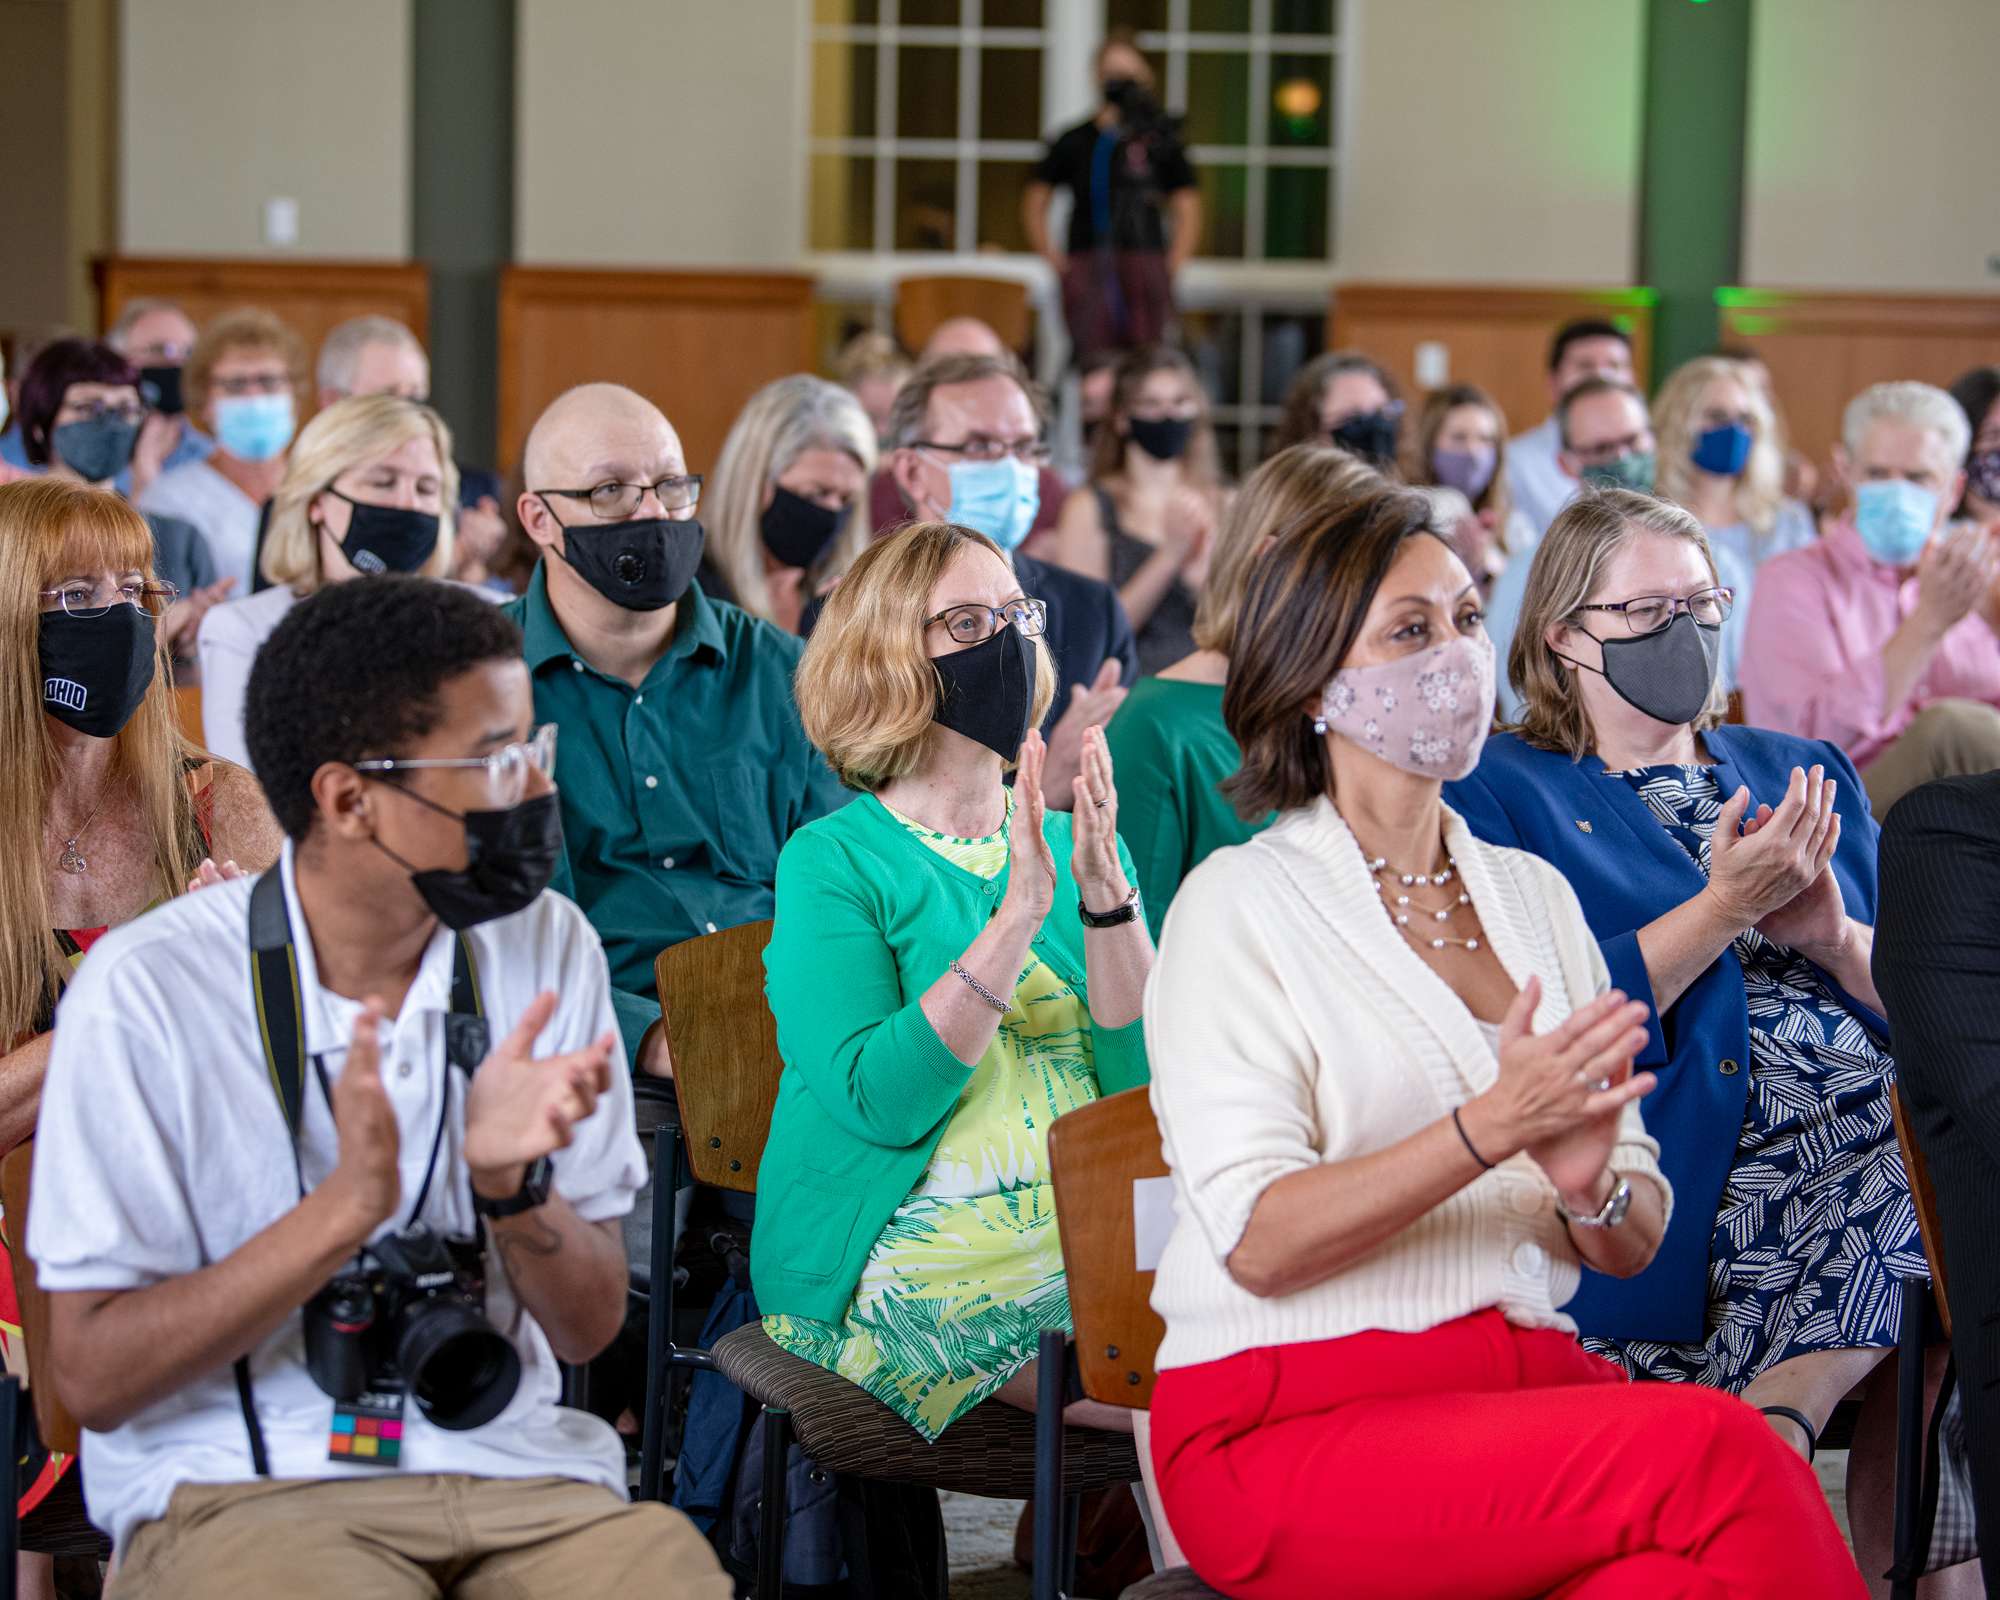 Ohio University faculty and staff applauding, wearing face masks, seated in Walter Hall Rotunda